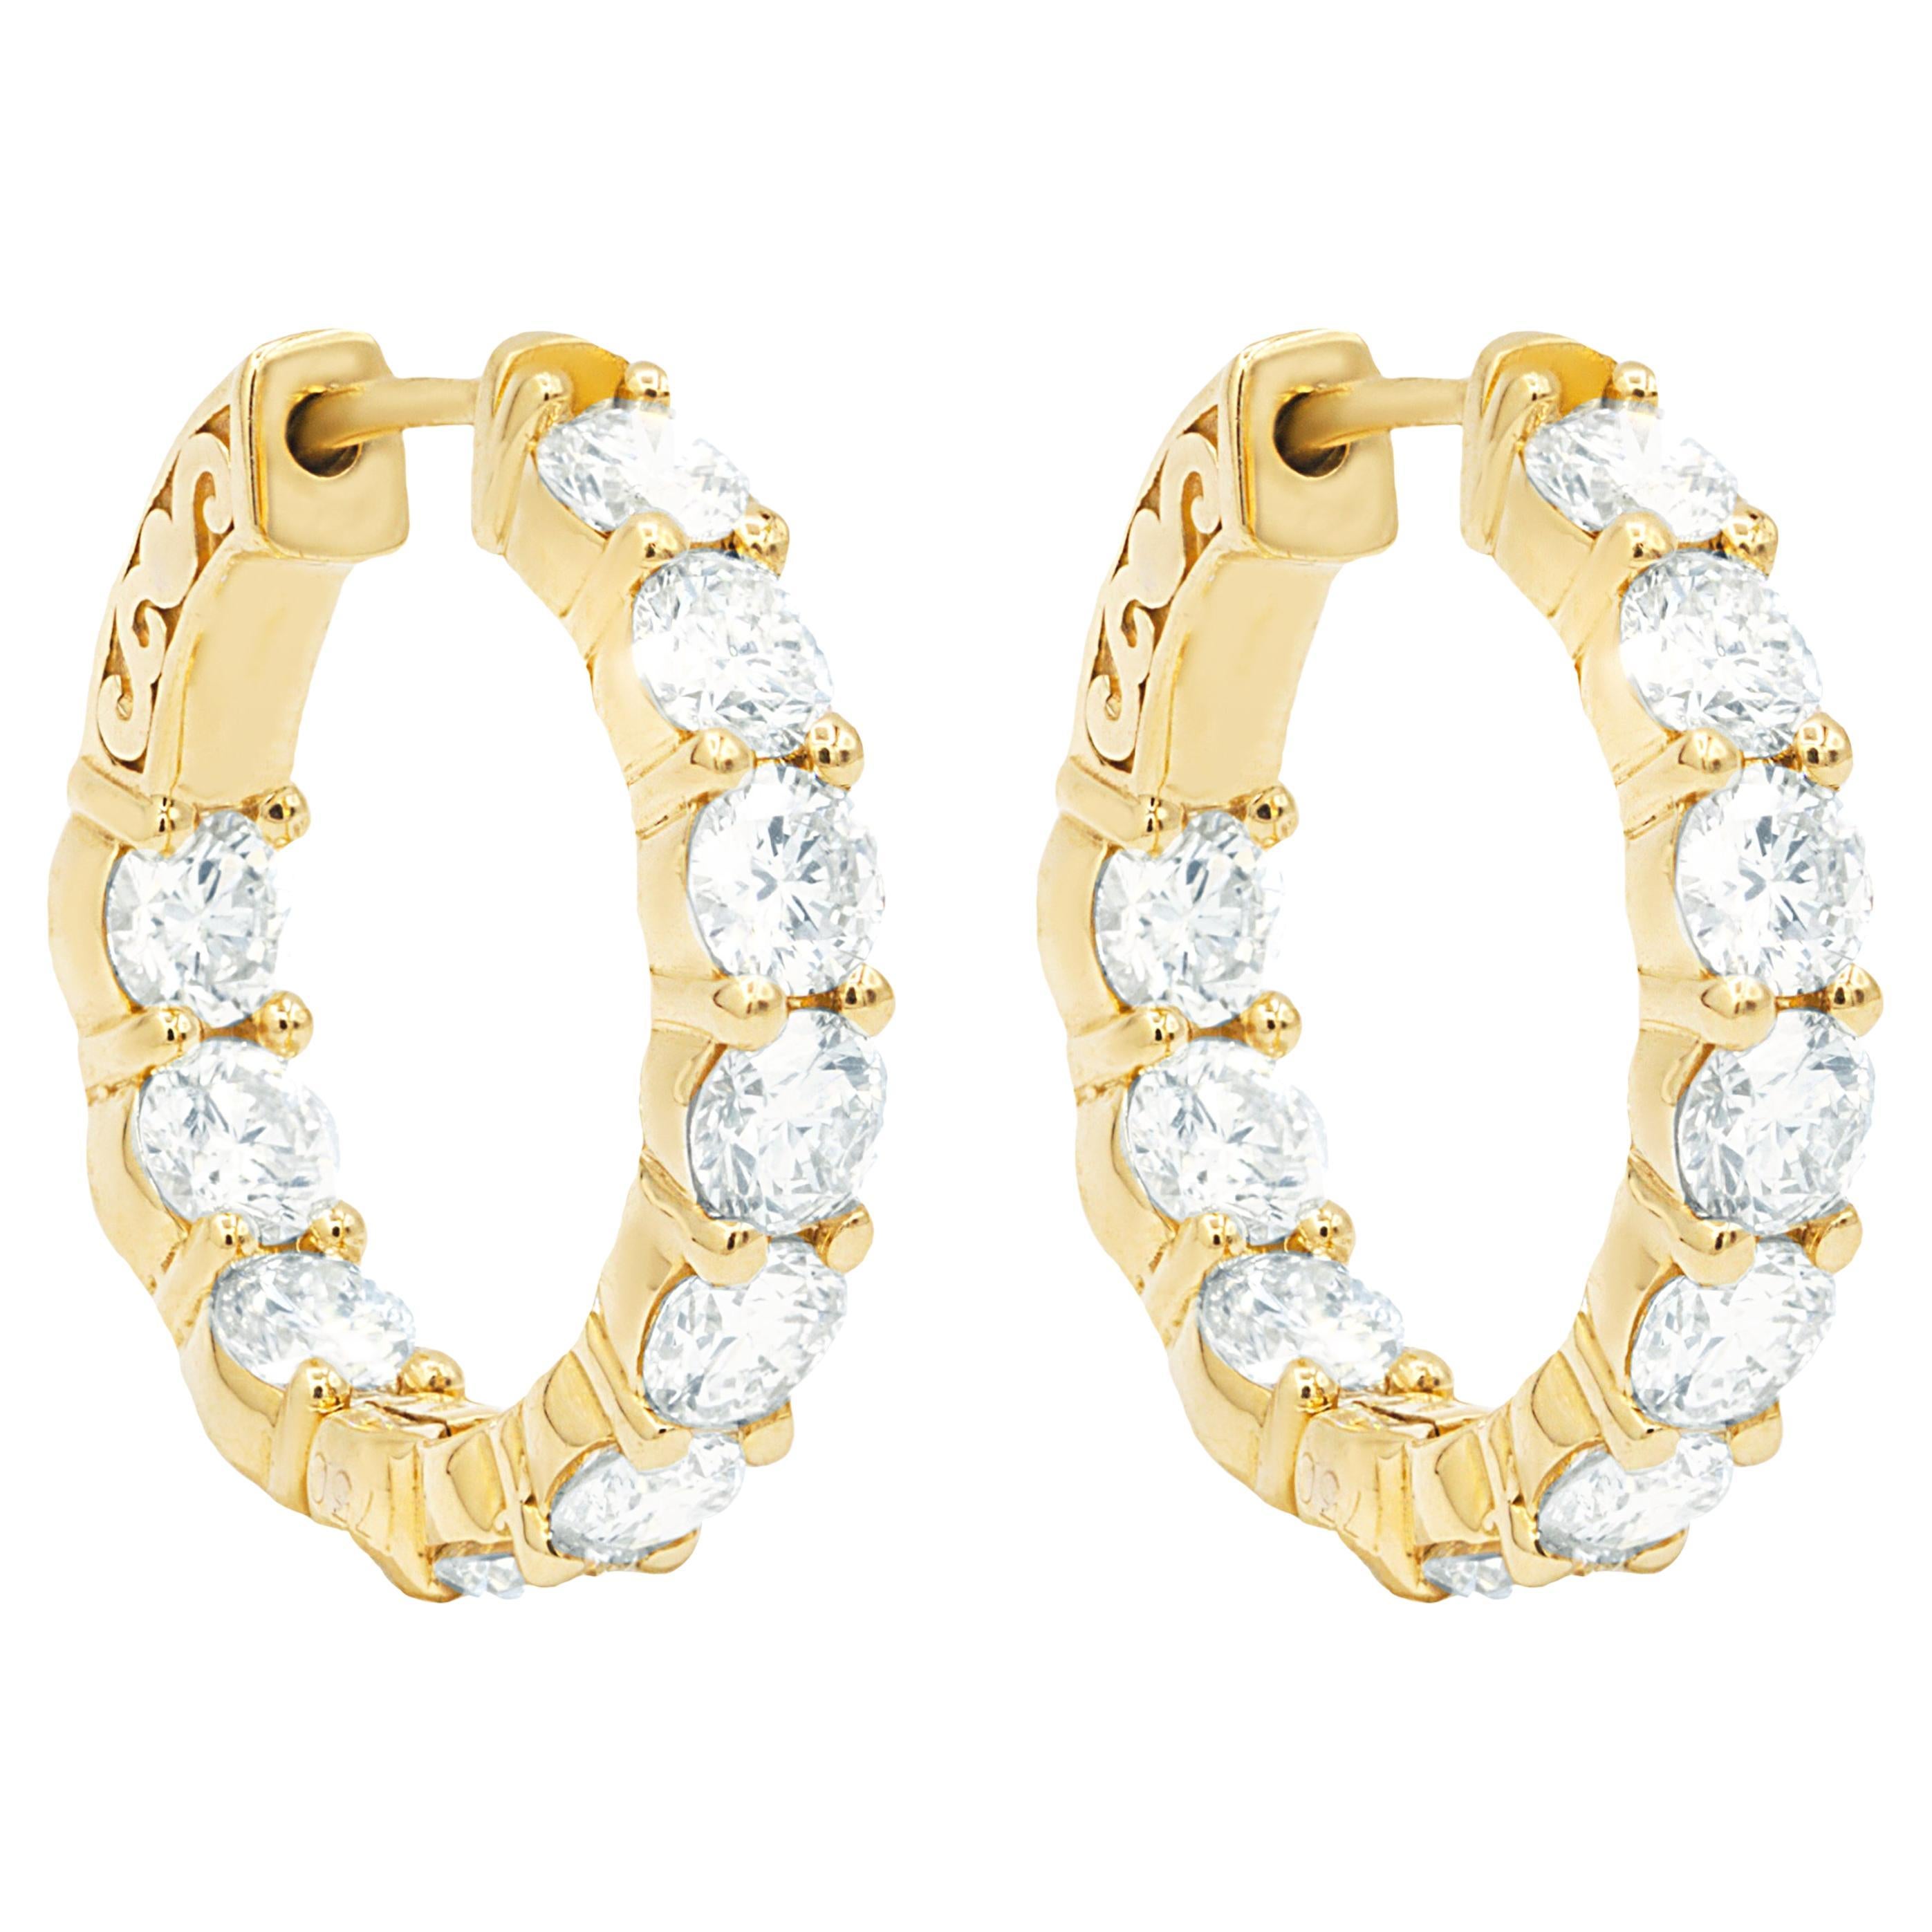 Diana M. 18 kt yellow gold inside-out hoop earrings adorned with 4.05 cts 